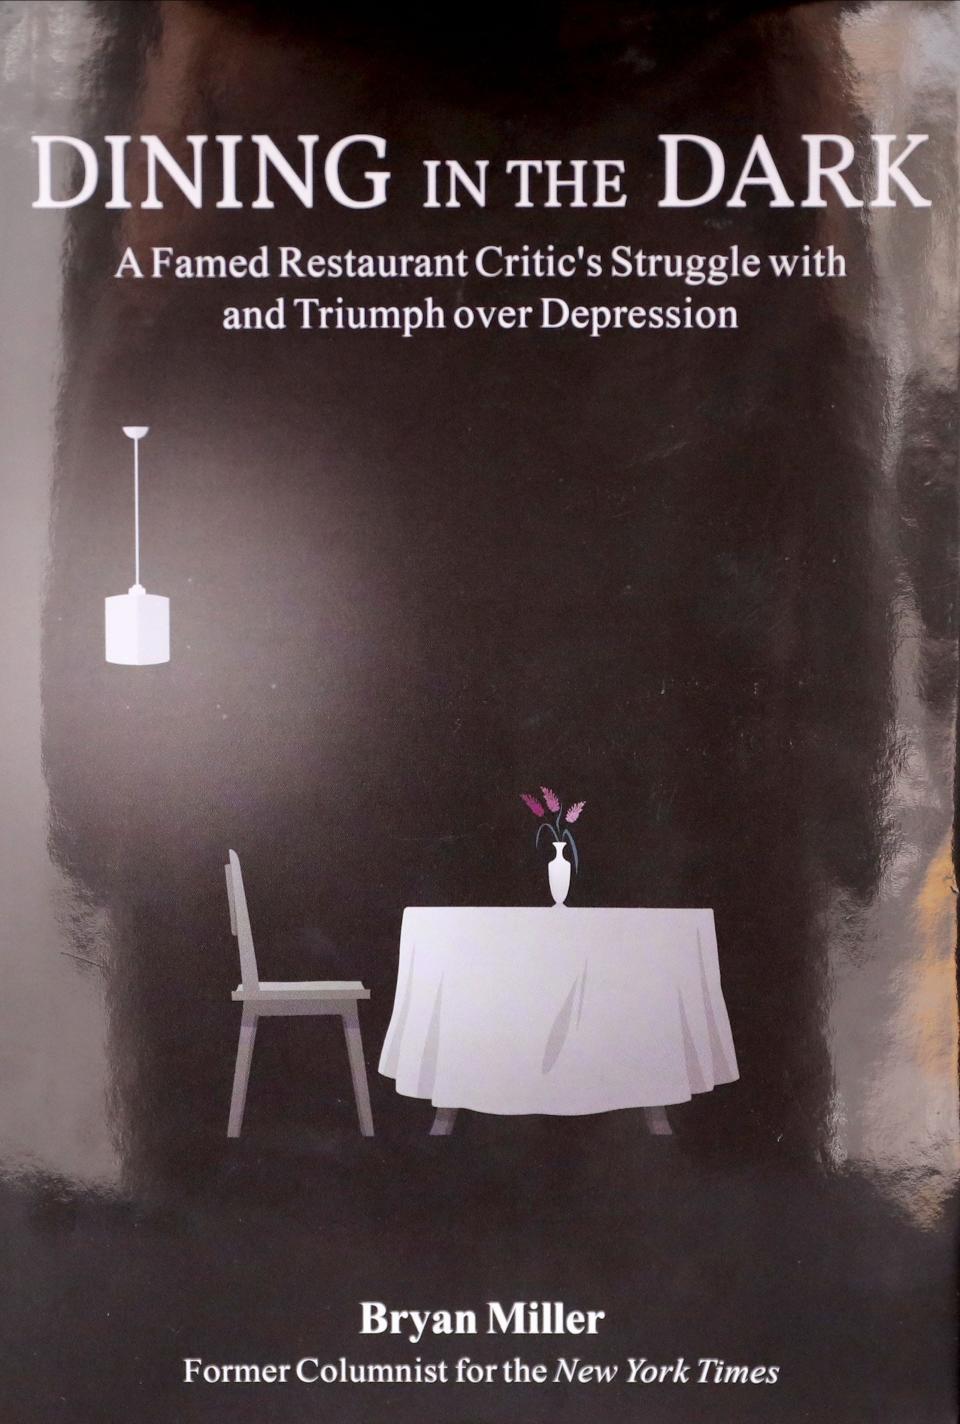 The new book "Dining in the Dark," by longtime New York Times restaurant (and Westchester resident) Bryan Miller, chronicles his triumph over depression.